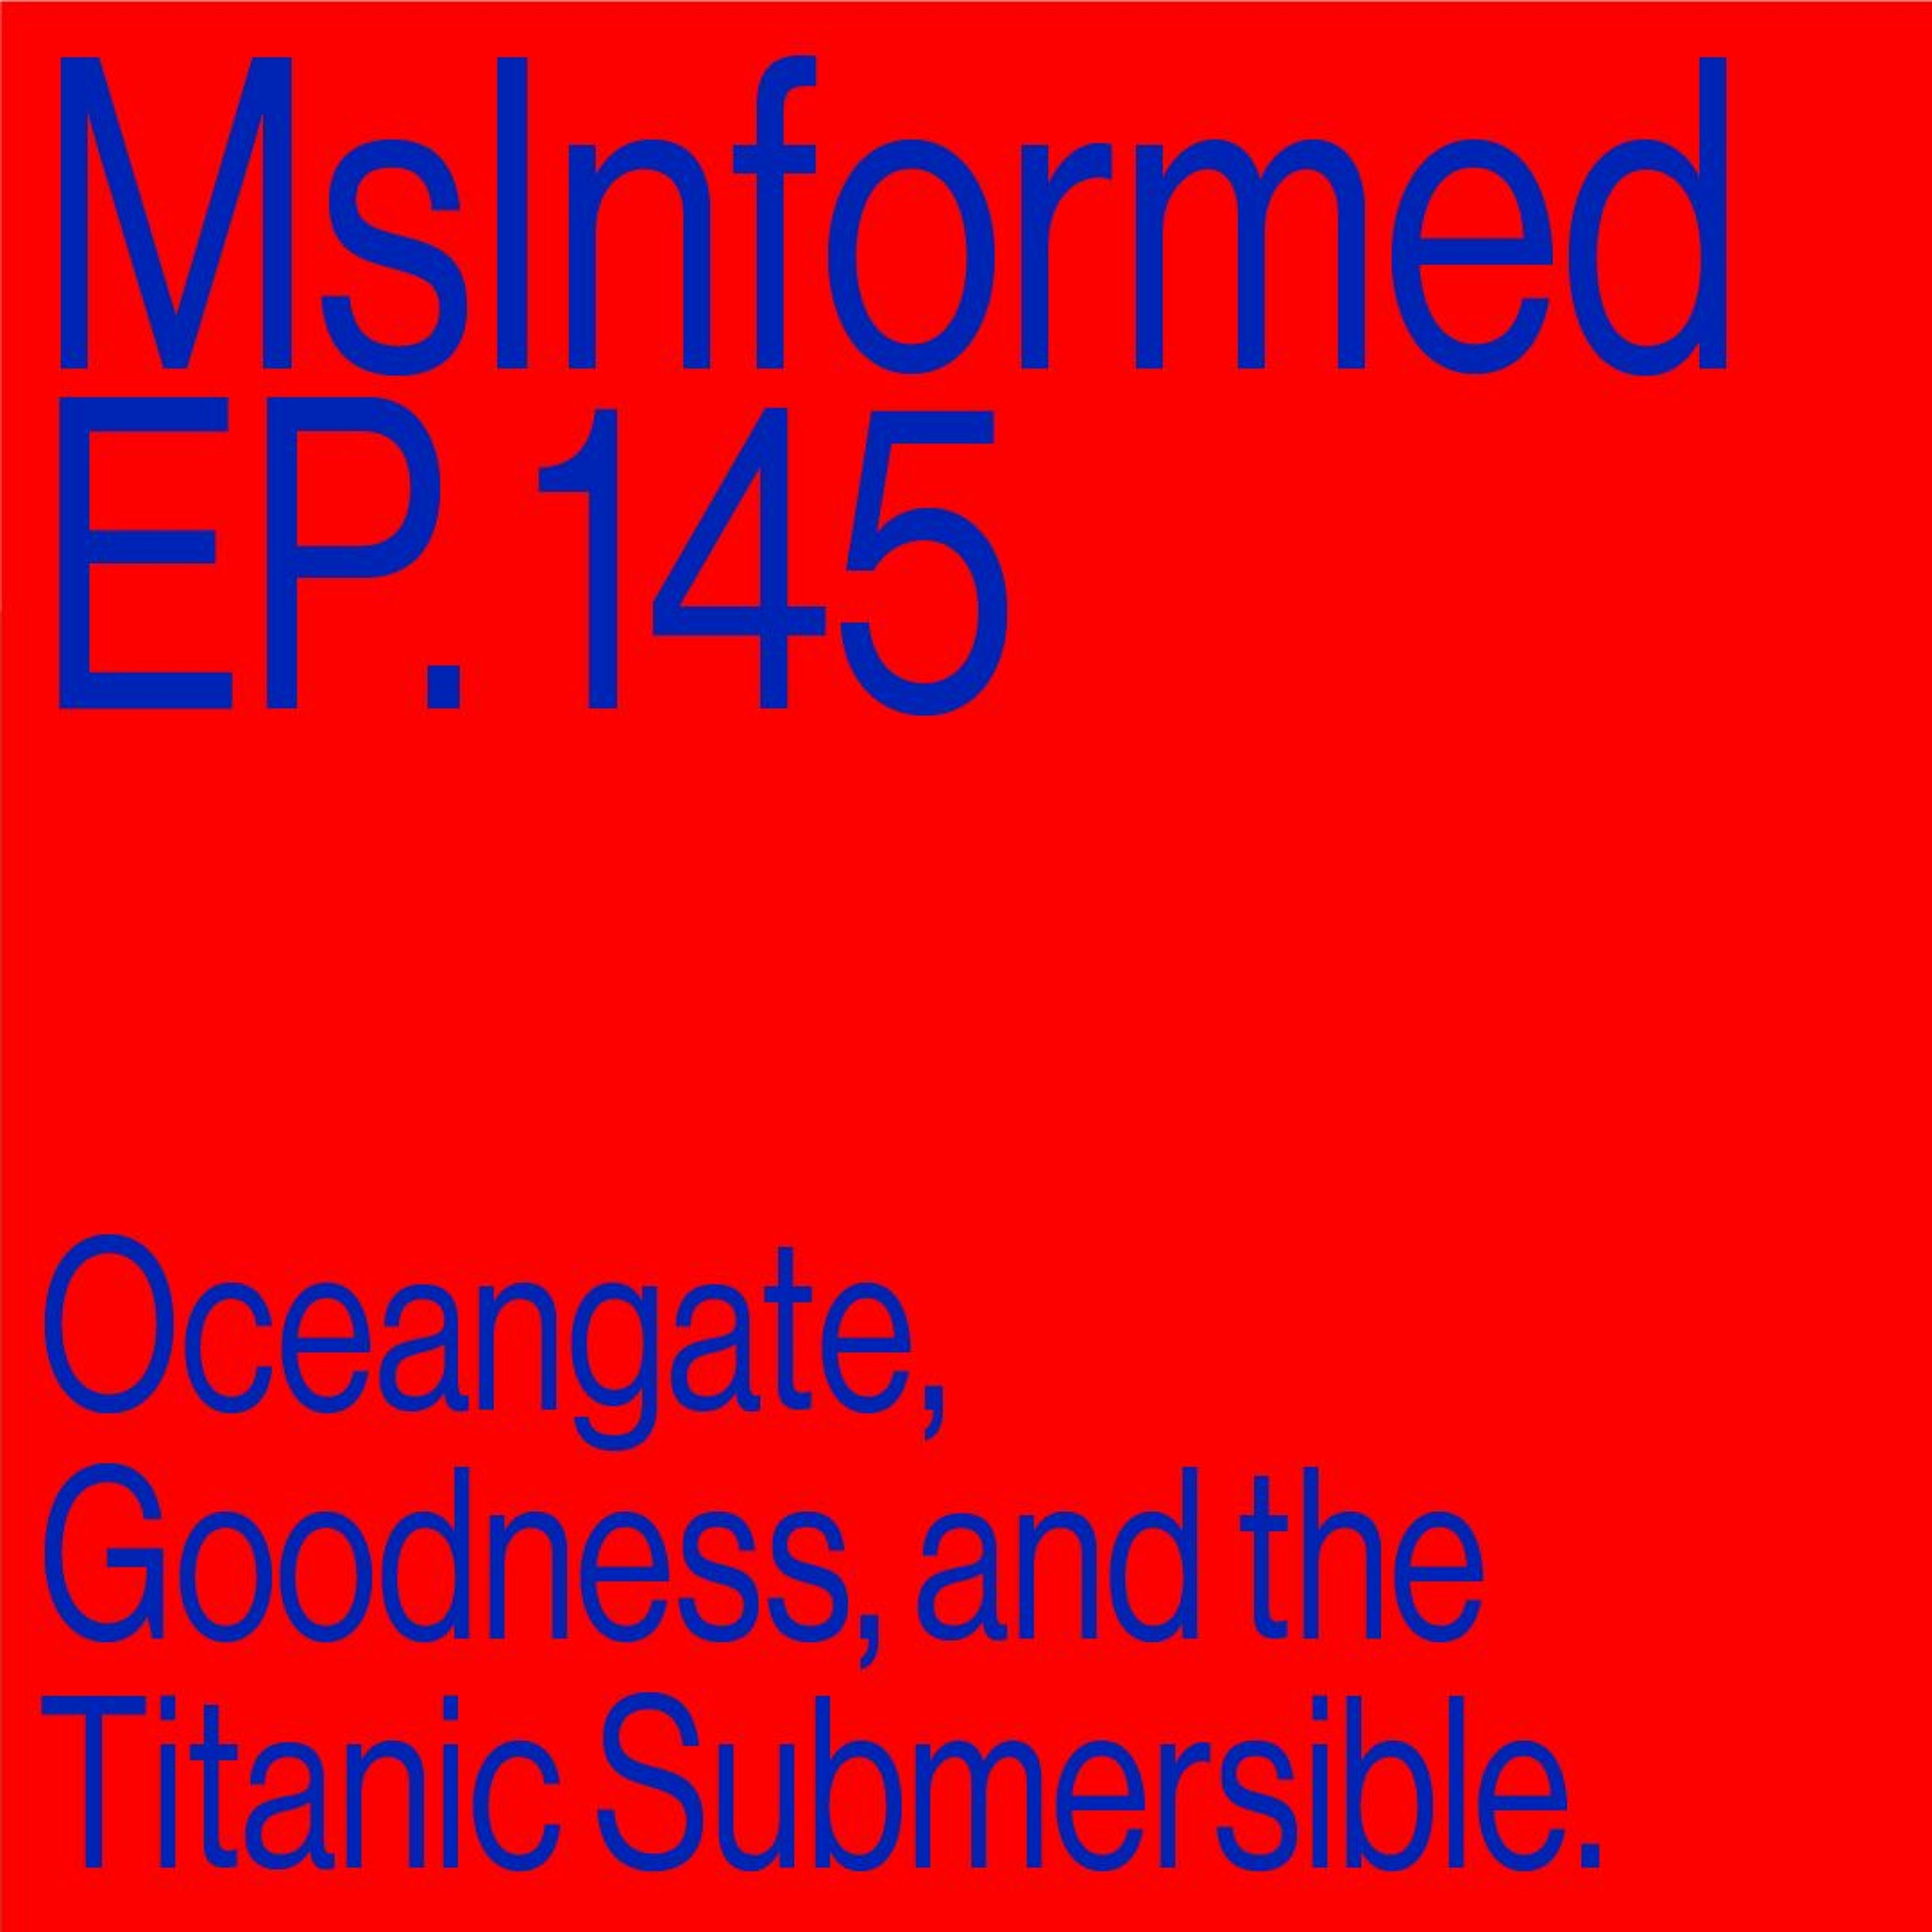 Episode 145: Oceangate, Goodness, and the Titanic Submersible